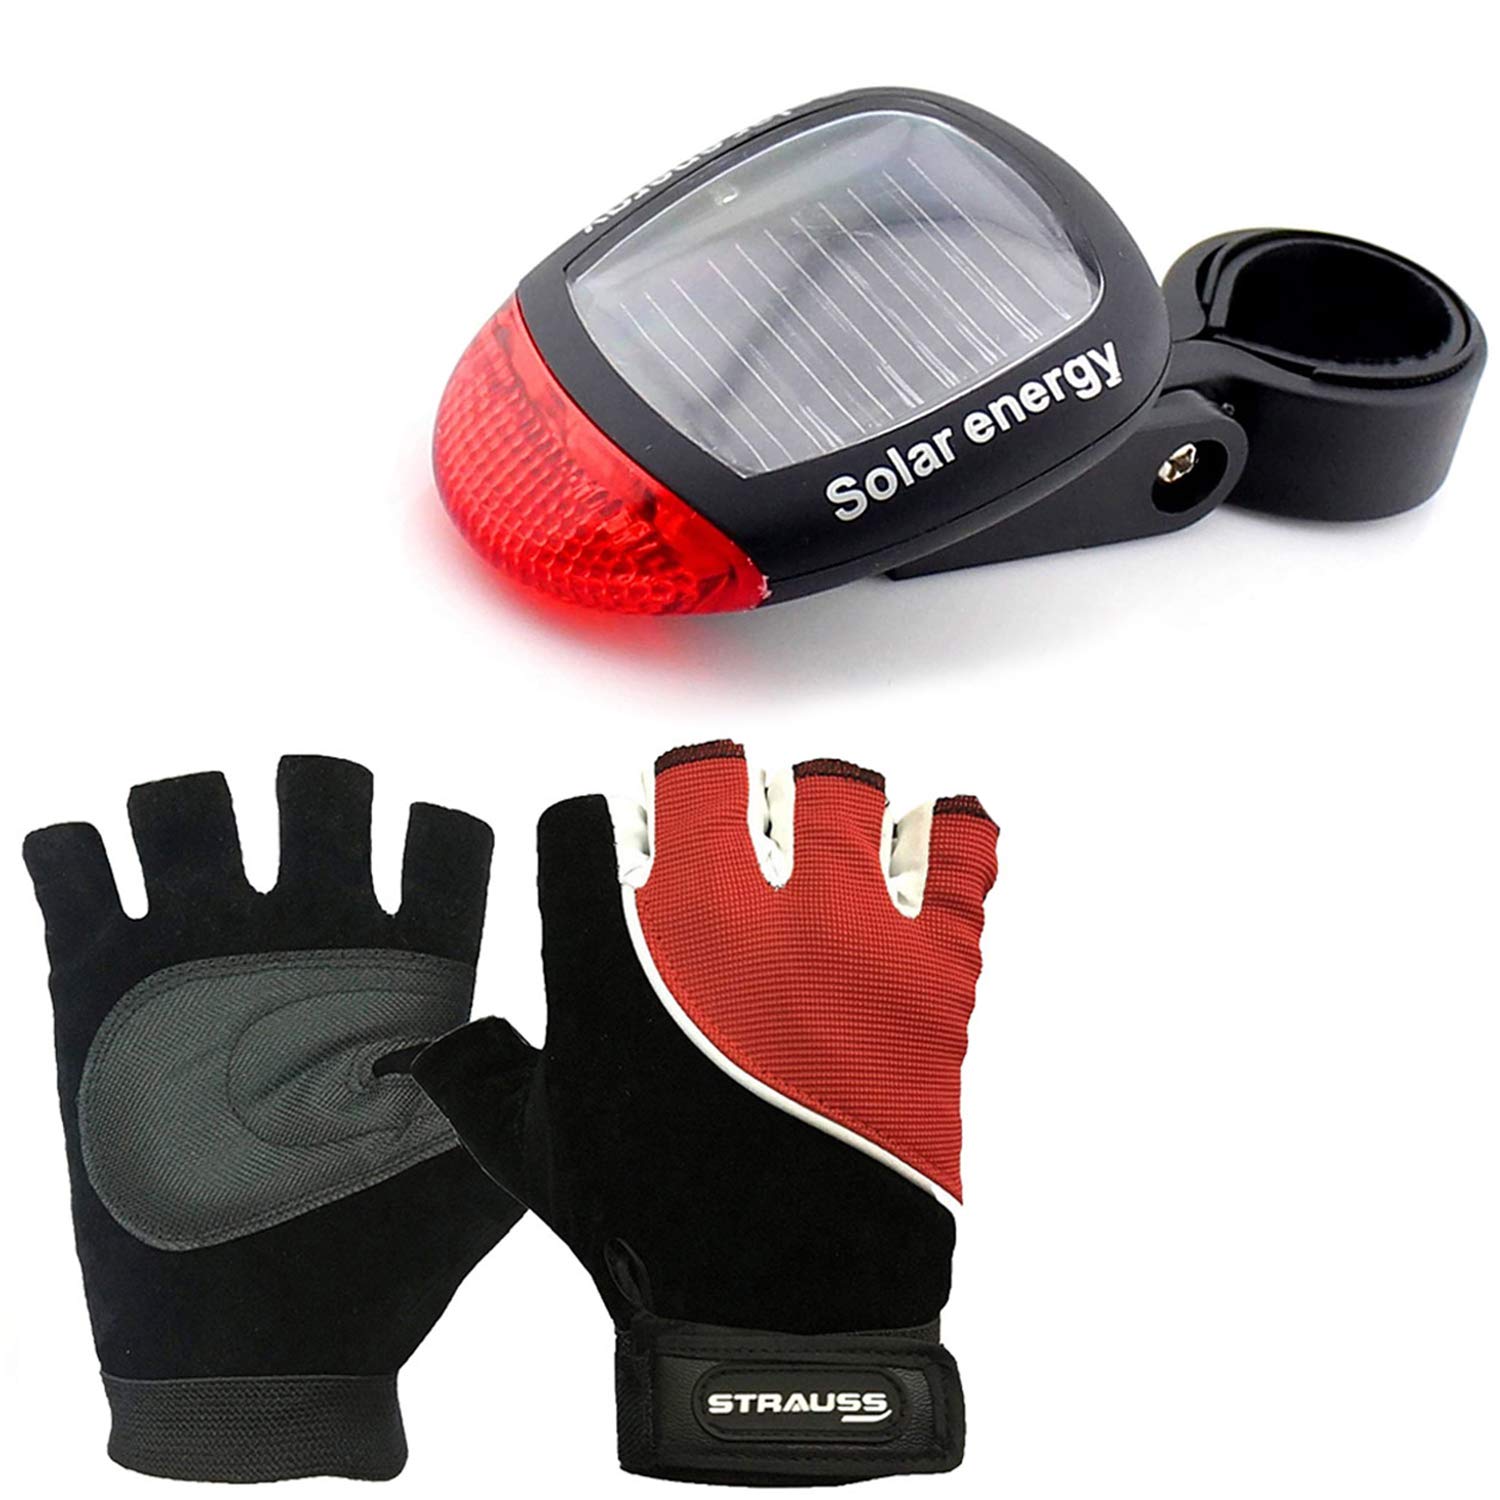 Strauss Bicycle Solar Tail Light and Cycling Gloves,Medium, (Black/Red)